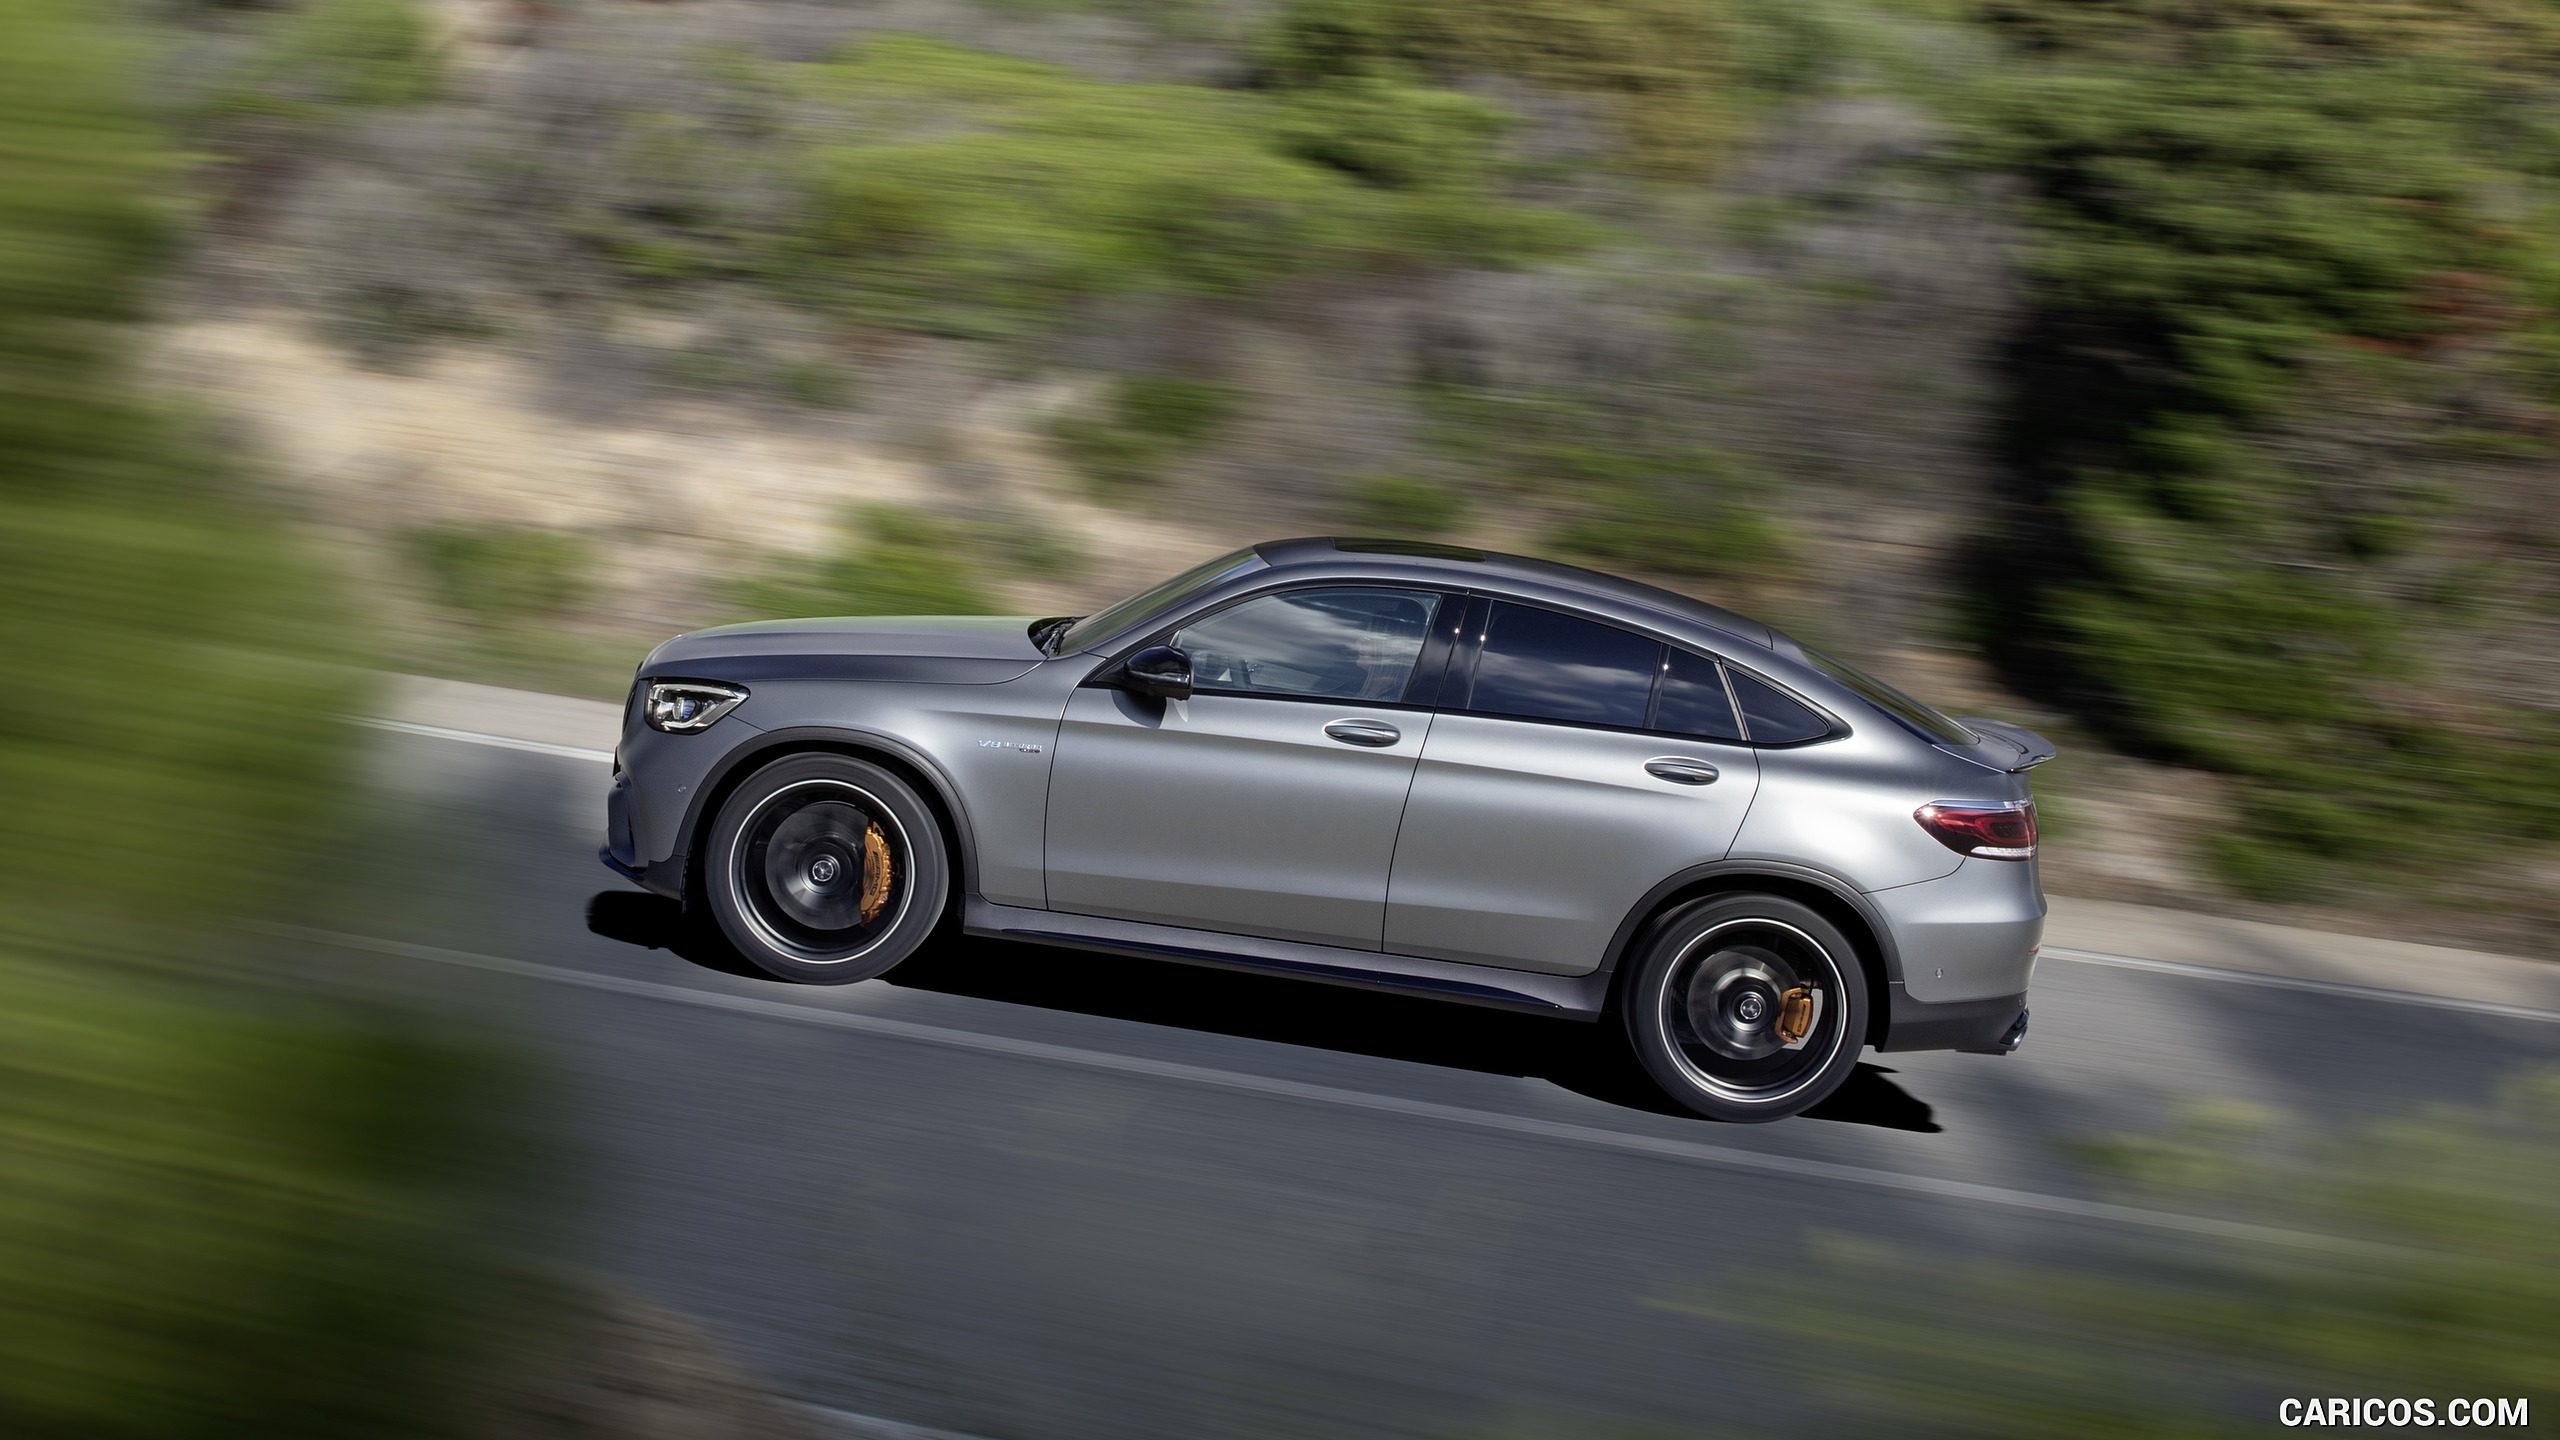 2020 Mercedes-AMG GLC 63 S 4MATIC+ Coupe - Side, #2 of 102